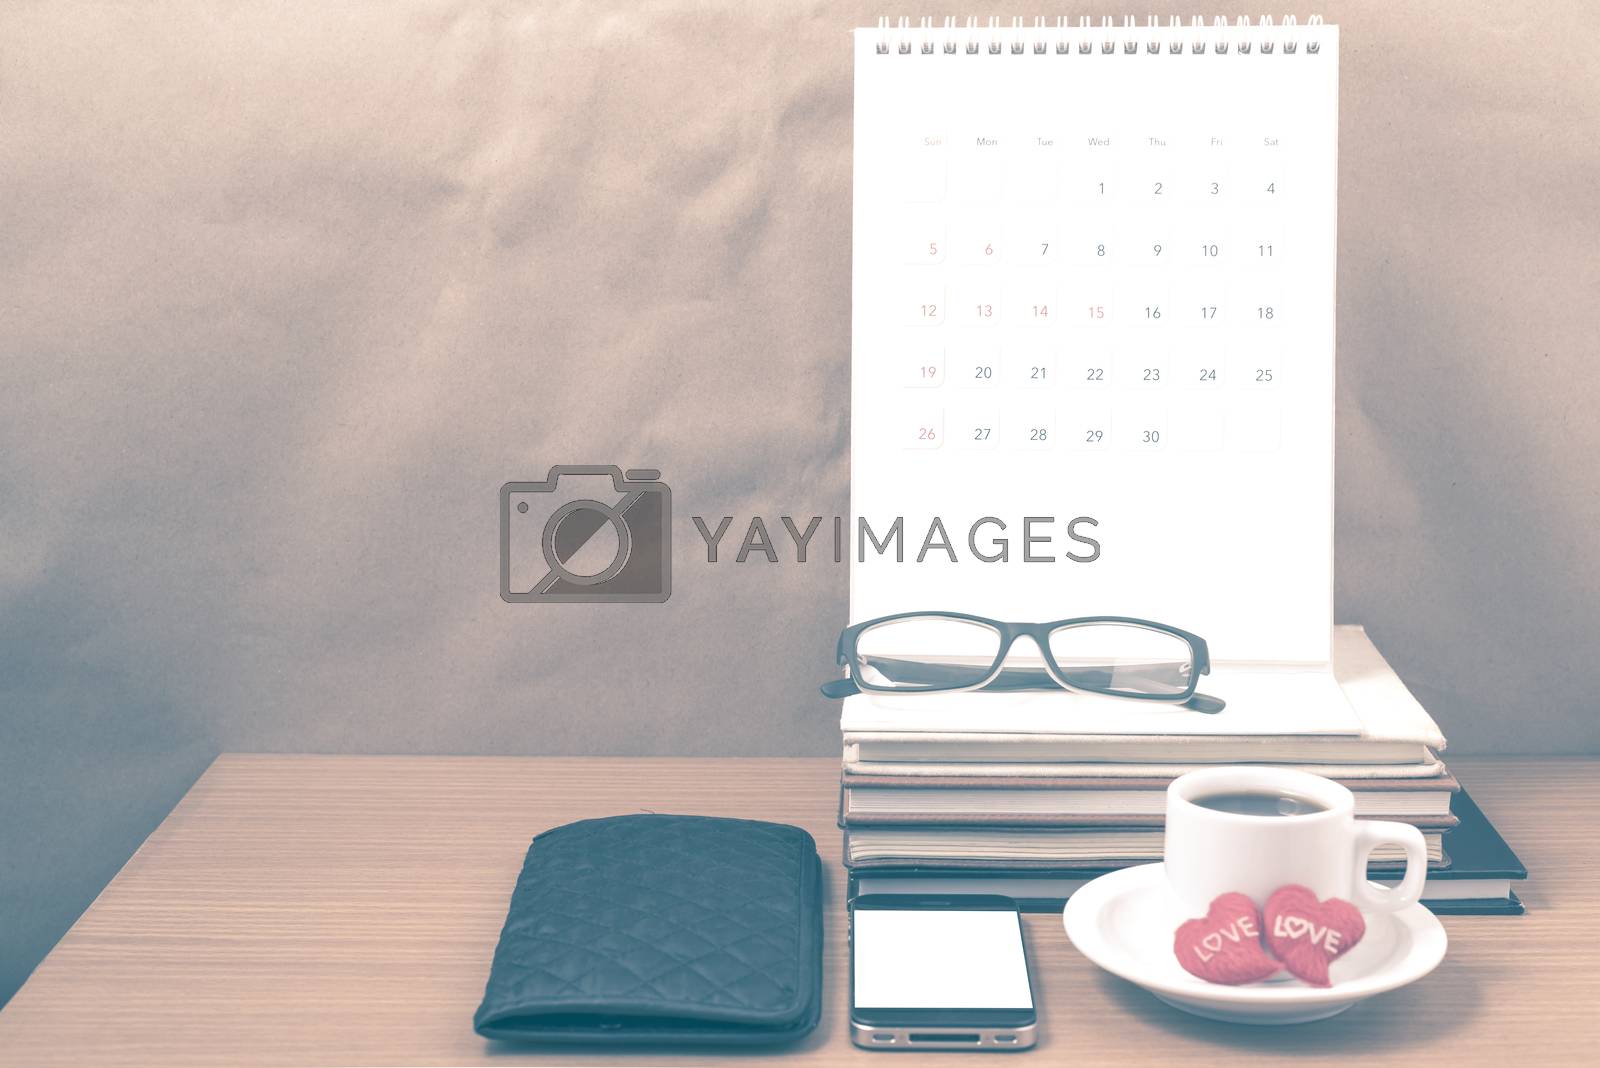 Royalty free image of office desk : coffee with phone,wallet,calendar,heart,stack of b by ammza12